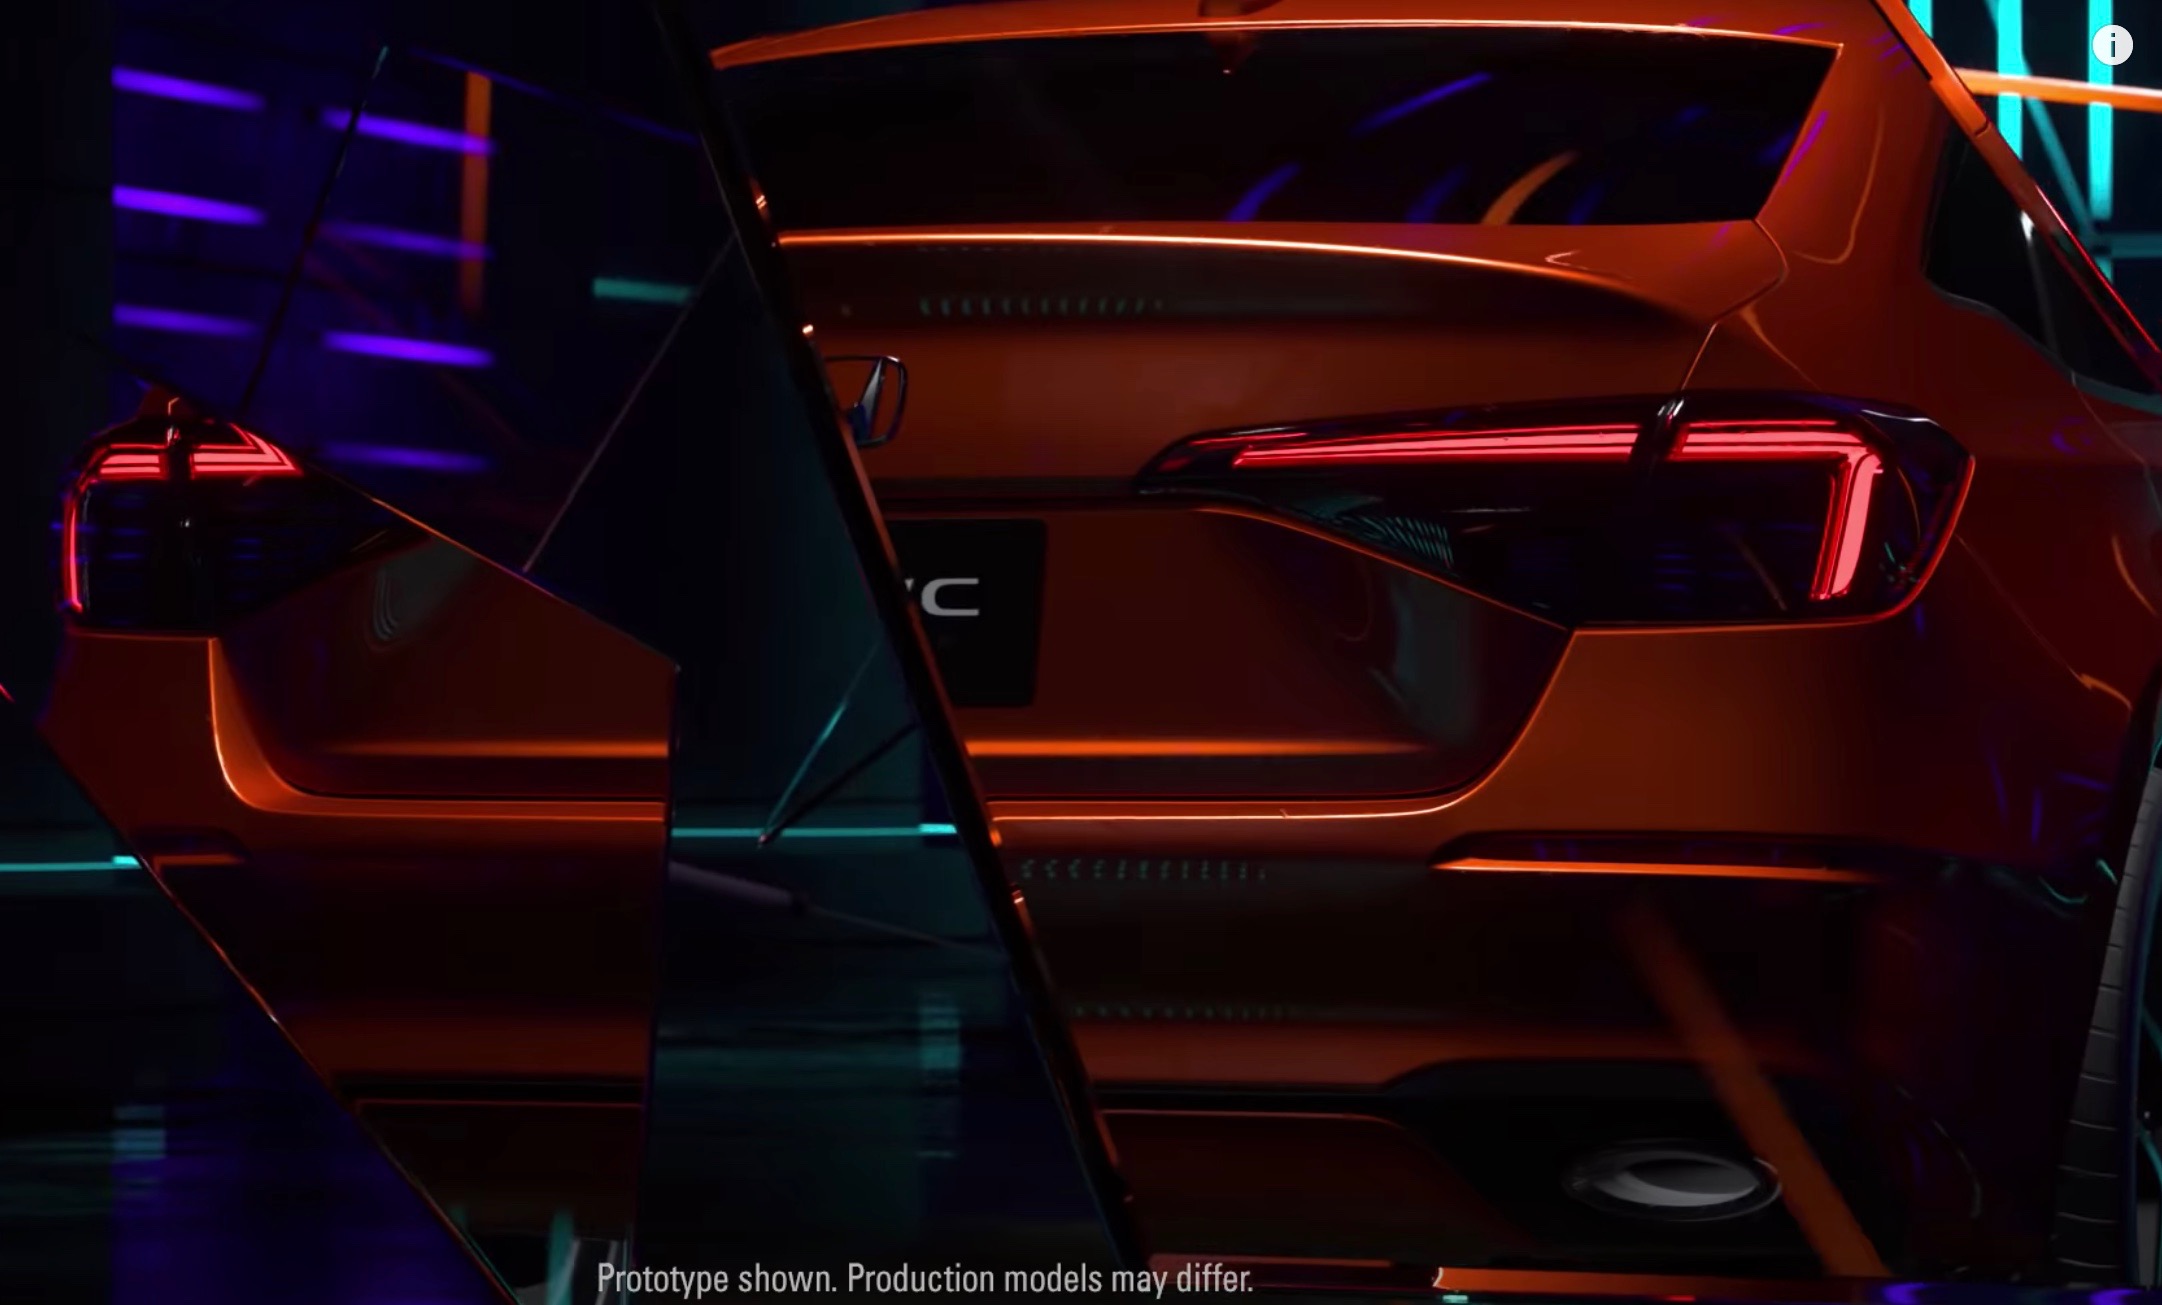 11th-gen 2022 Honda Civic preview shows smoother design (video)